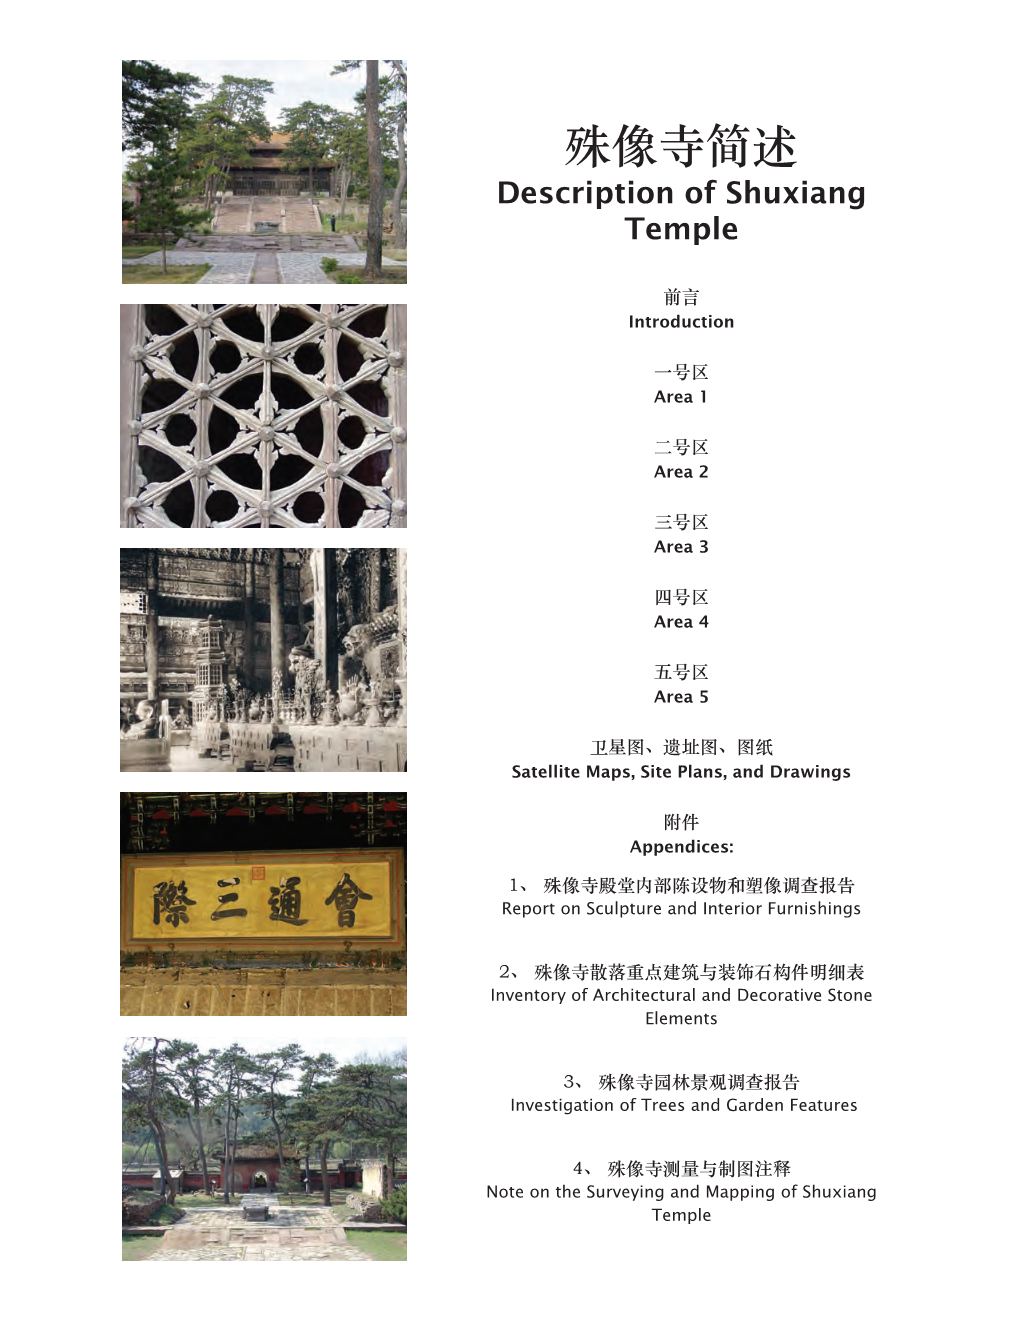 Assessment Report on Shuxiang Temple, Chengde, China